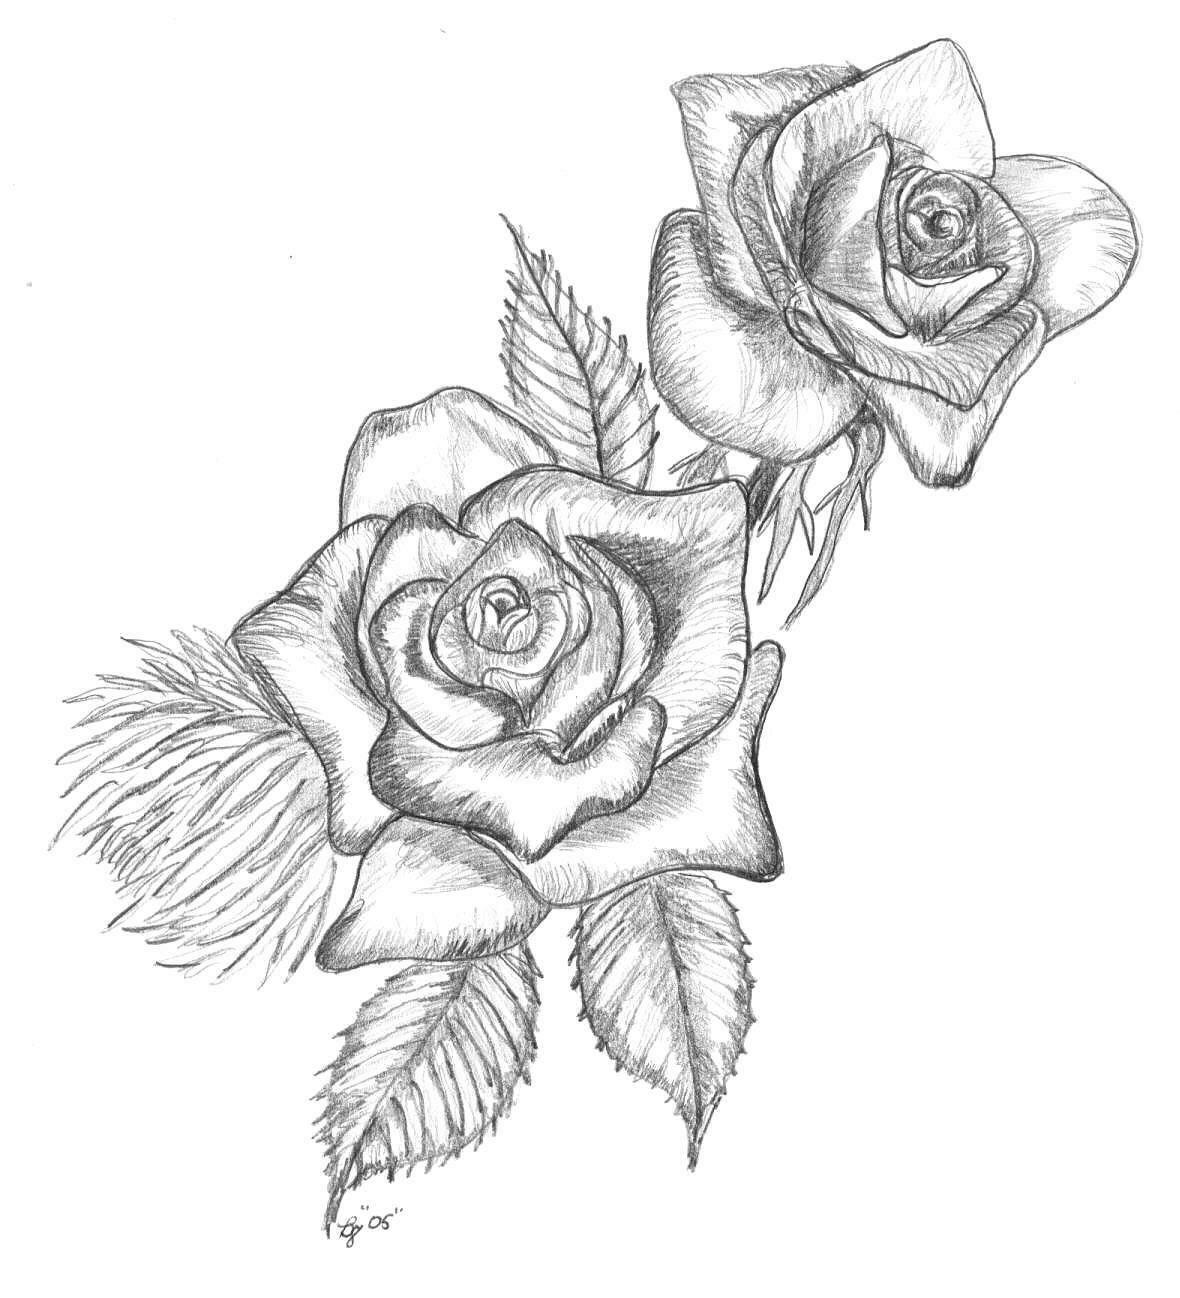 Two Roses by bdolphnz on DeviantArt